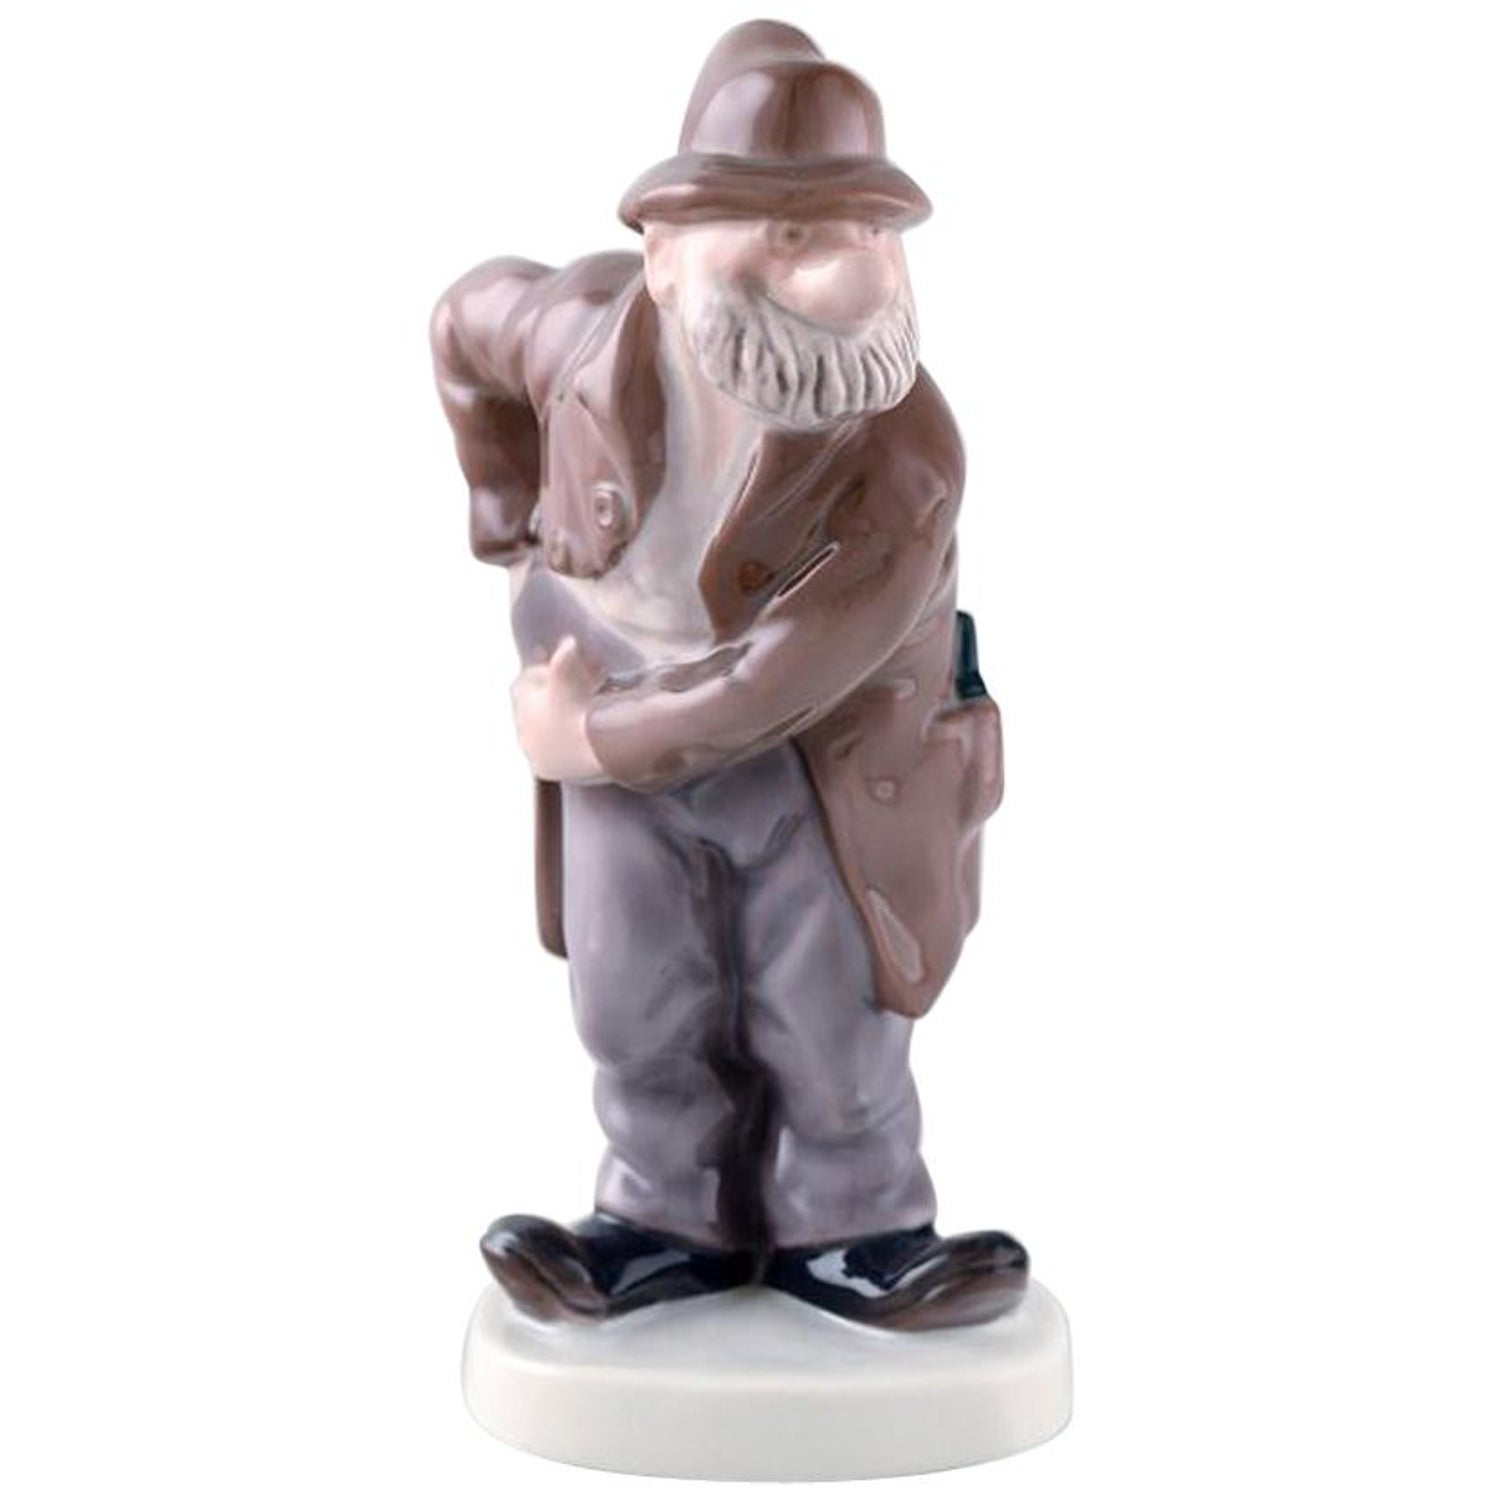 Bing and Grondahl porcelain figurine. Pericles / Vagabond, after Storm For Sale at